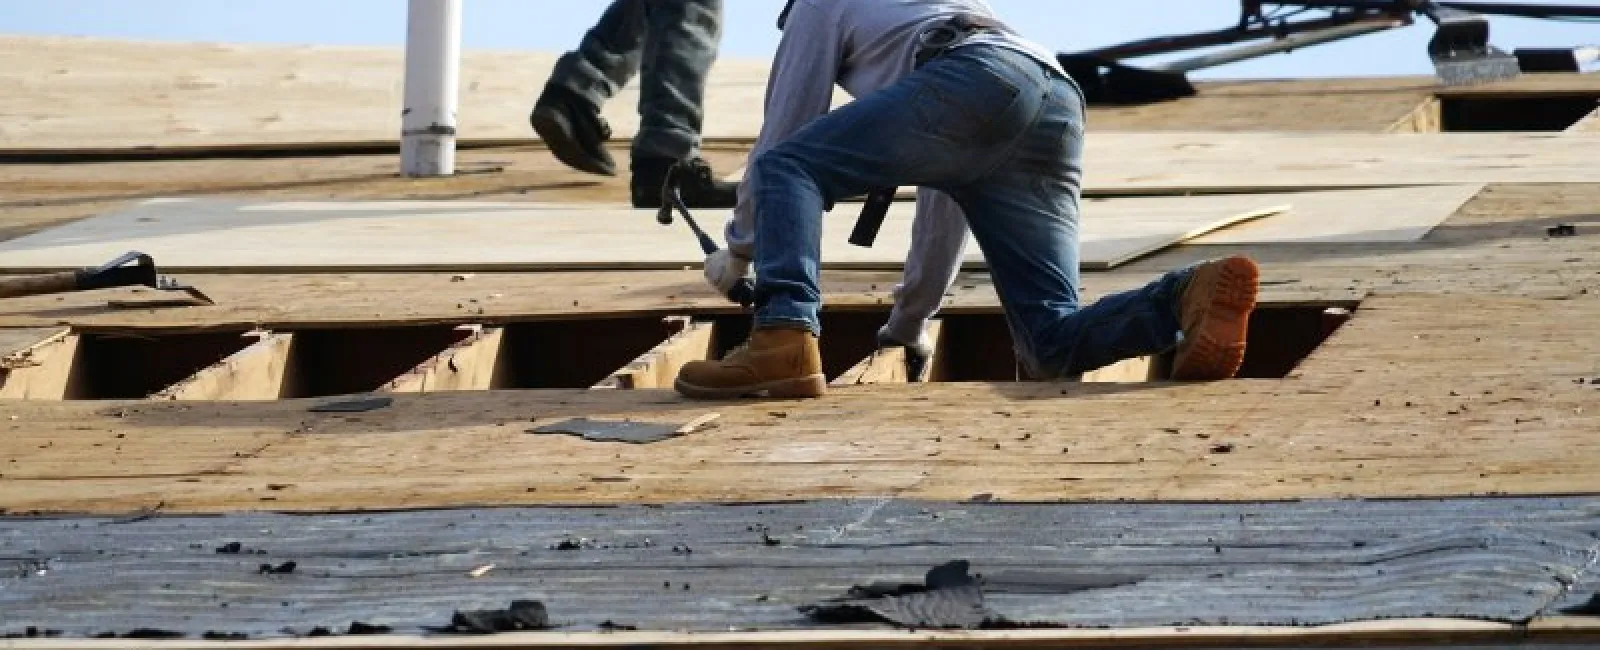 Why Roof Repair Should Be Your Home Improvement Priority